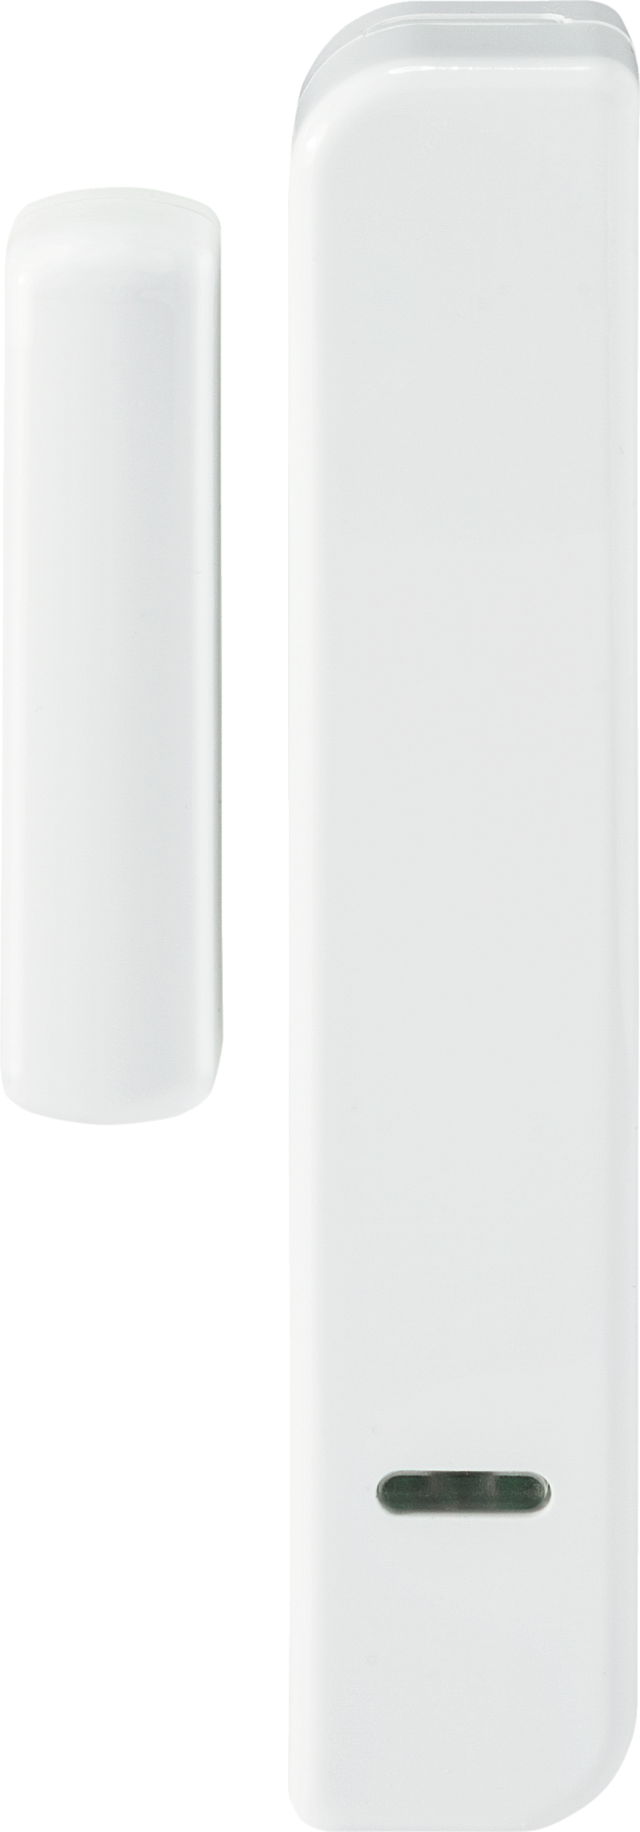 Secvest Small Wireless Magnetic Contact (white)